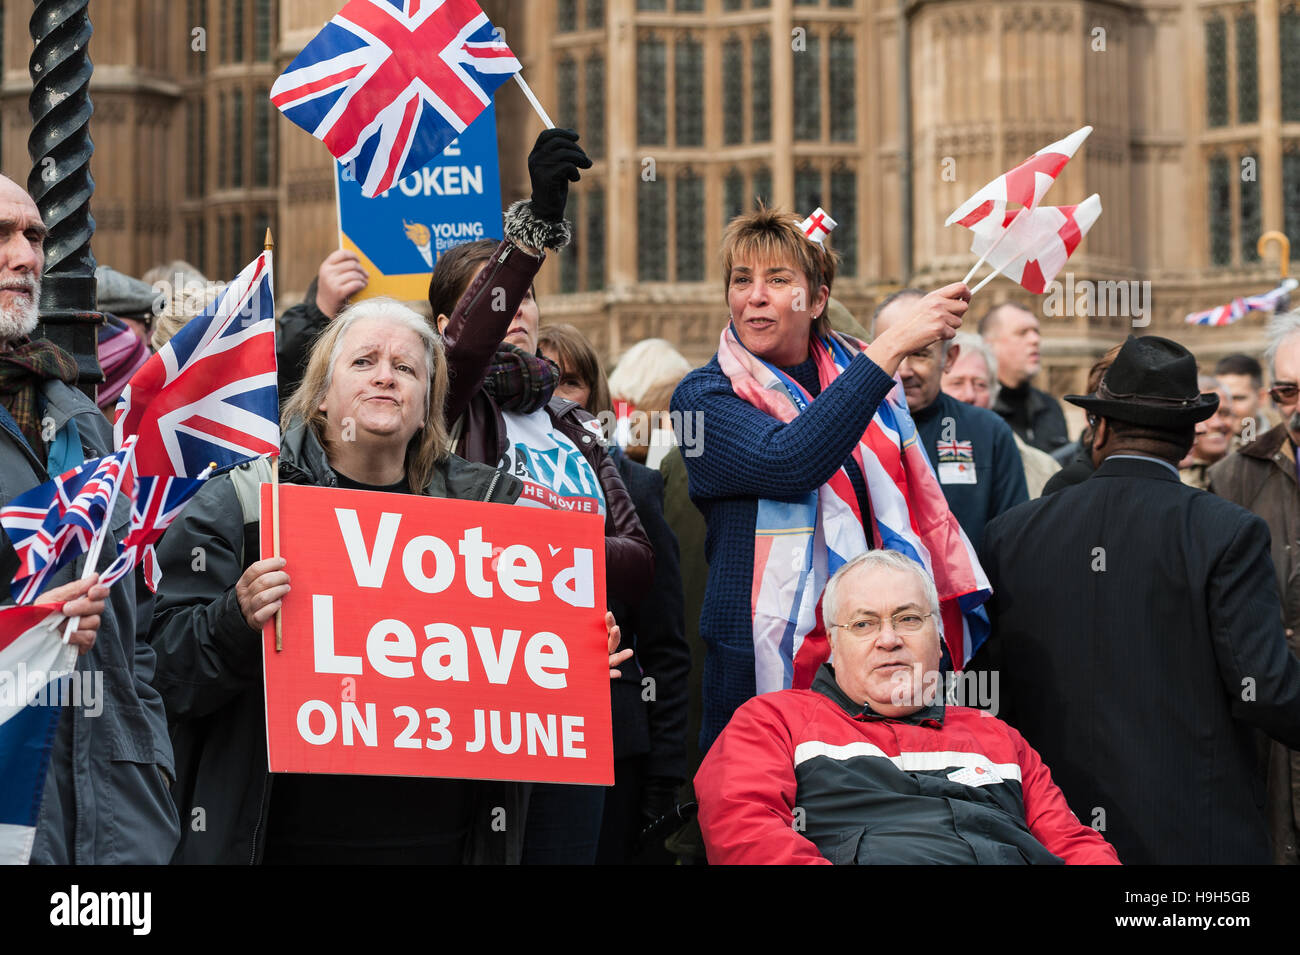 London, UK. 23rd November 2016. Hundreds of pro-Brexit supporters gather to demonstrate outside Houses of Parliament on the day of the Autumn Statement. The main focus of the protest was to demand immediate triggering of Article 50 by the Prime Minister Theresa May and to oppose the recent High Court ruling to give MPs the final decision on the matter. The protesters call on the judges, government and MPs to respect and act on the result of the EU referendum where 52% voted to leave the European Union. Wiktor Szymanowicz/Alamy Live News Stock Photo